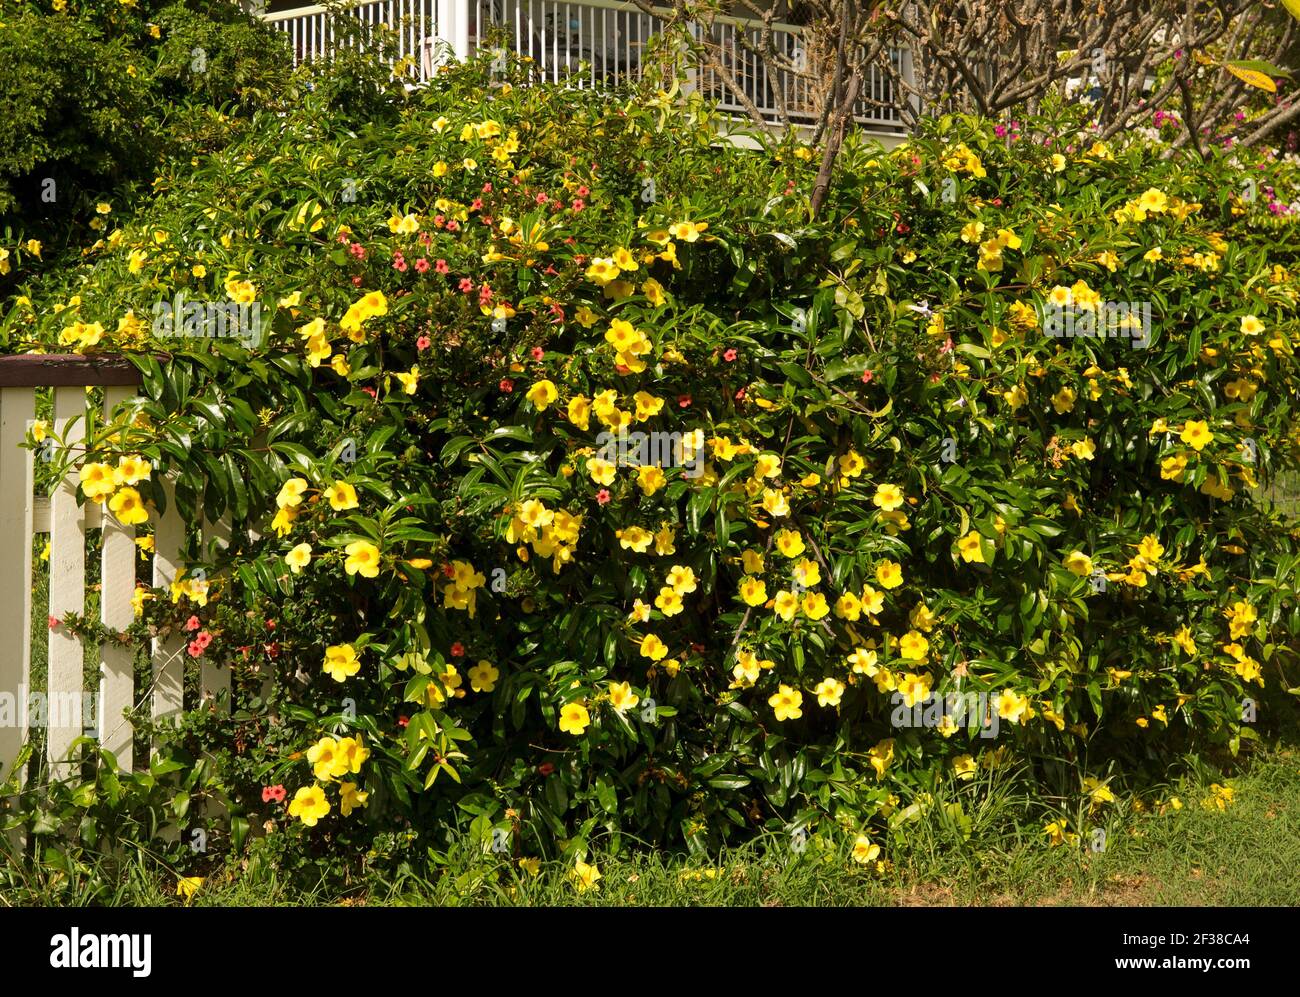 Climbing plant, Allamanda cathartica, with masses of vivid yellow flowers and bright green leaves growing on garden fence in Australia Stock Photo